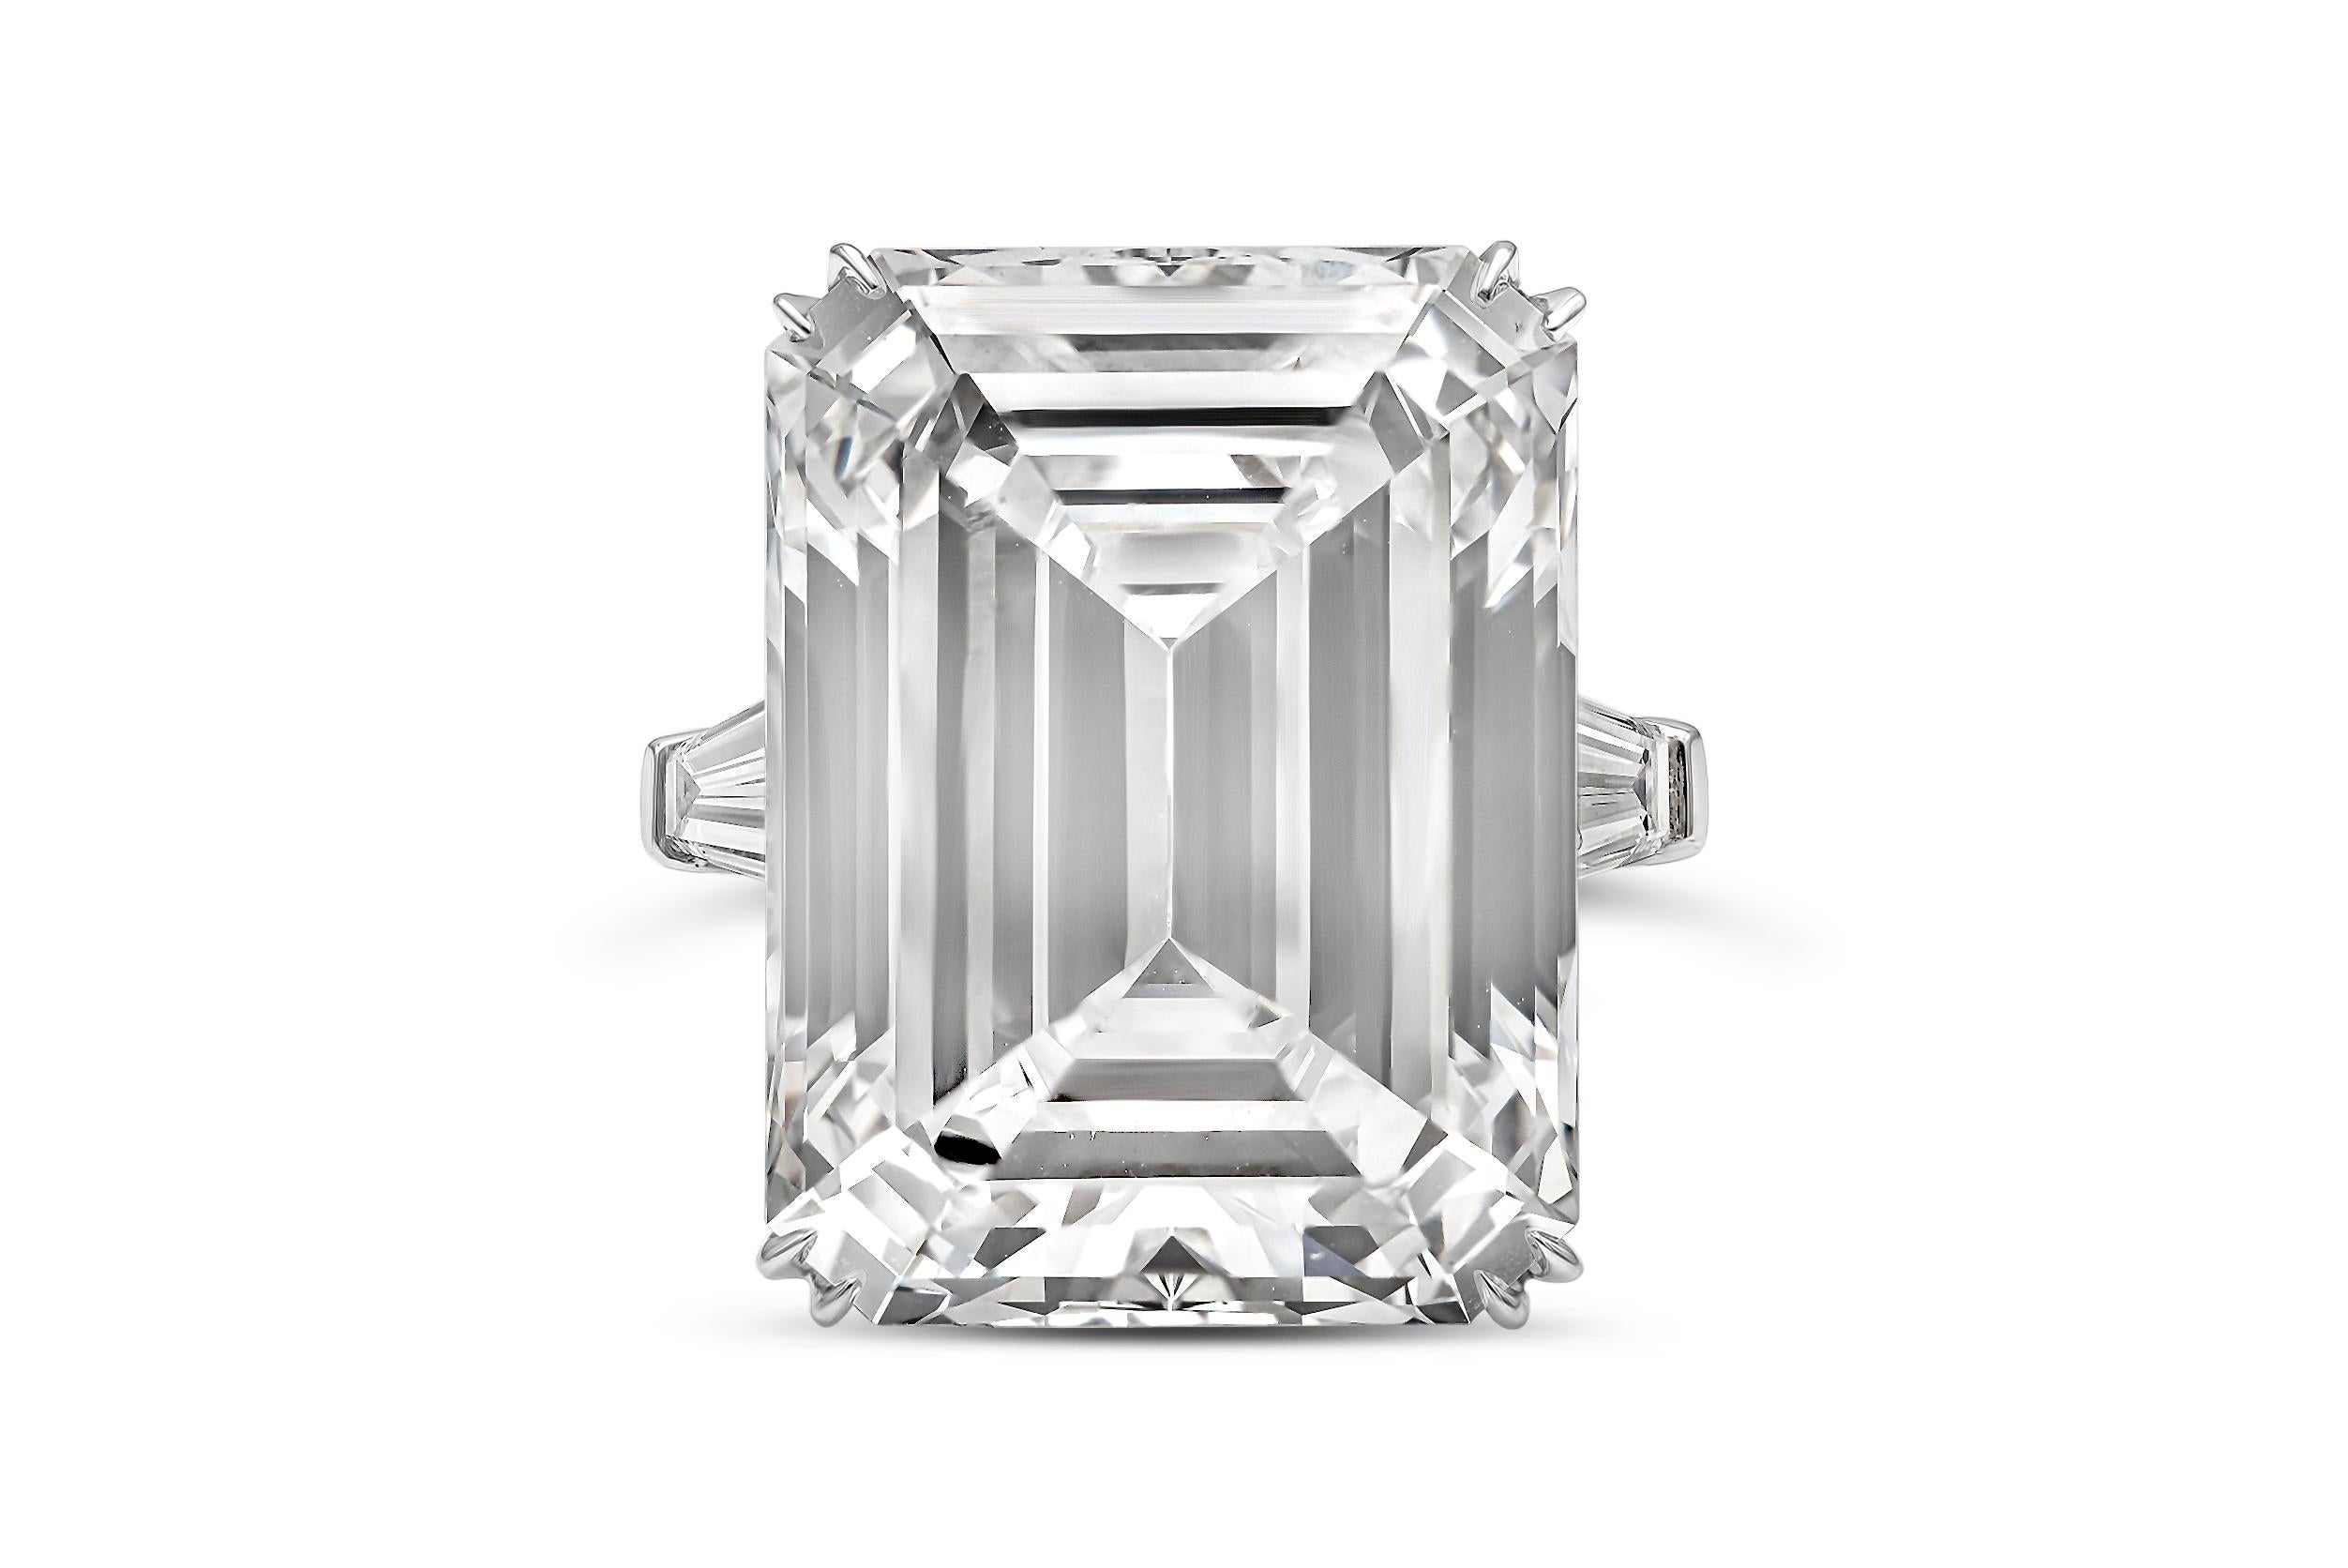 An important and very rare engagement ring, showcasing a 25.32 carats emerald cut diamond certified by GIA as D color and IF clarity, with excellent polish and excellent symmetry. The center stone is flanked by tapered baguette diamonds weighing